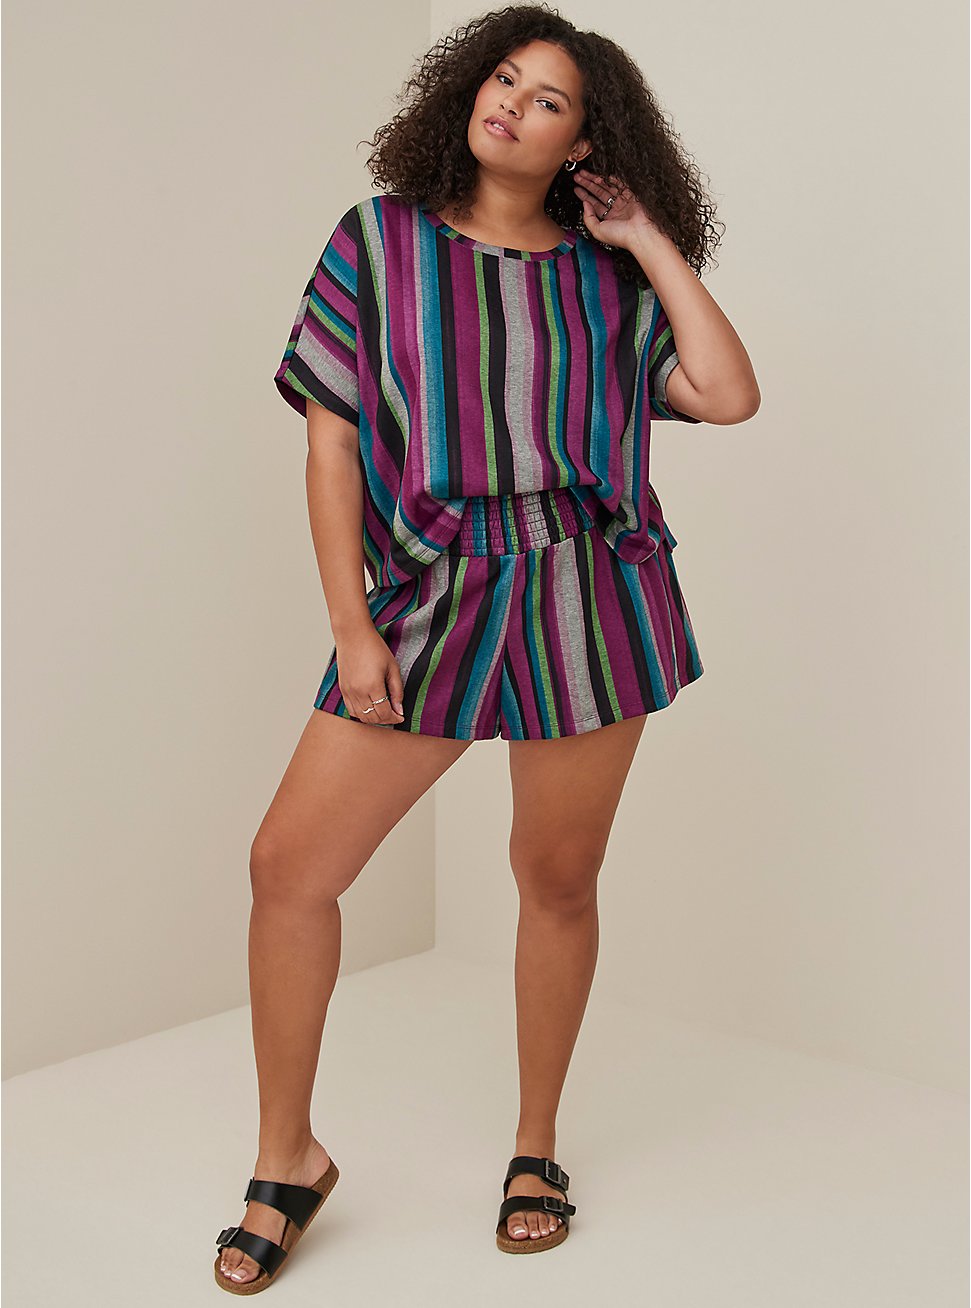 Plus Size Cover-Up Shorts - Light Weight Fleece Stripes, MULTI, hi-res